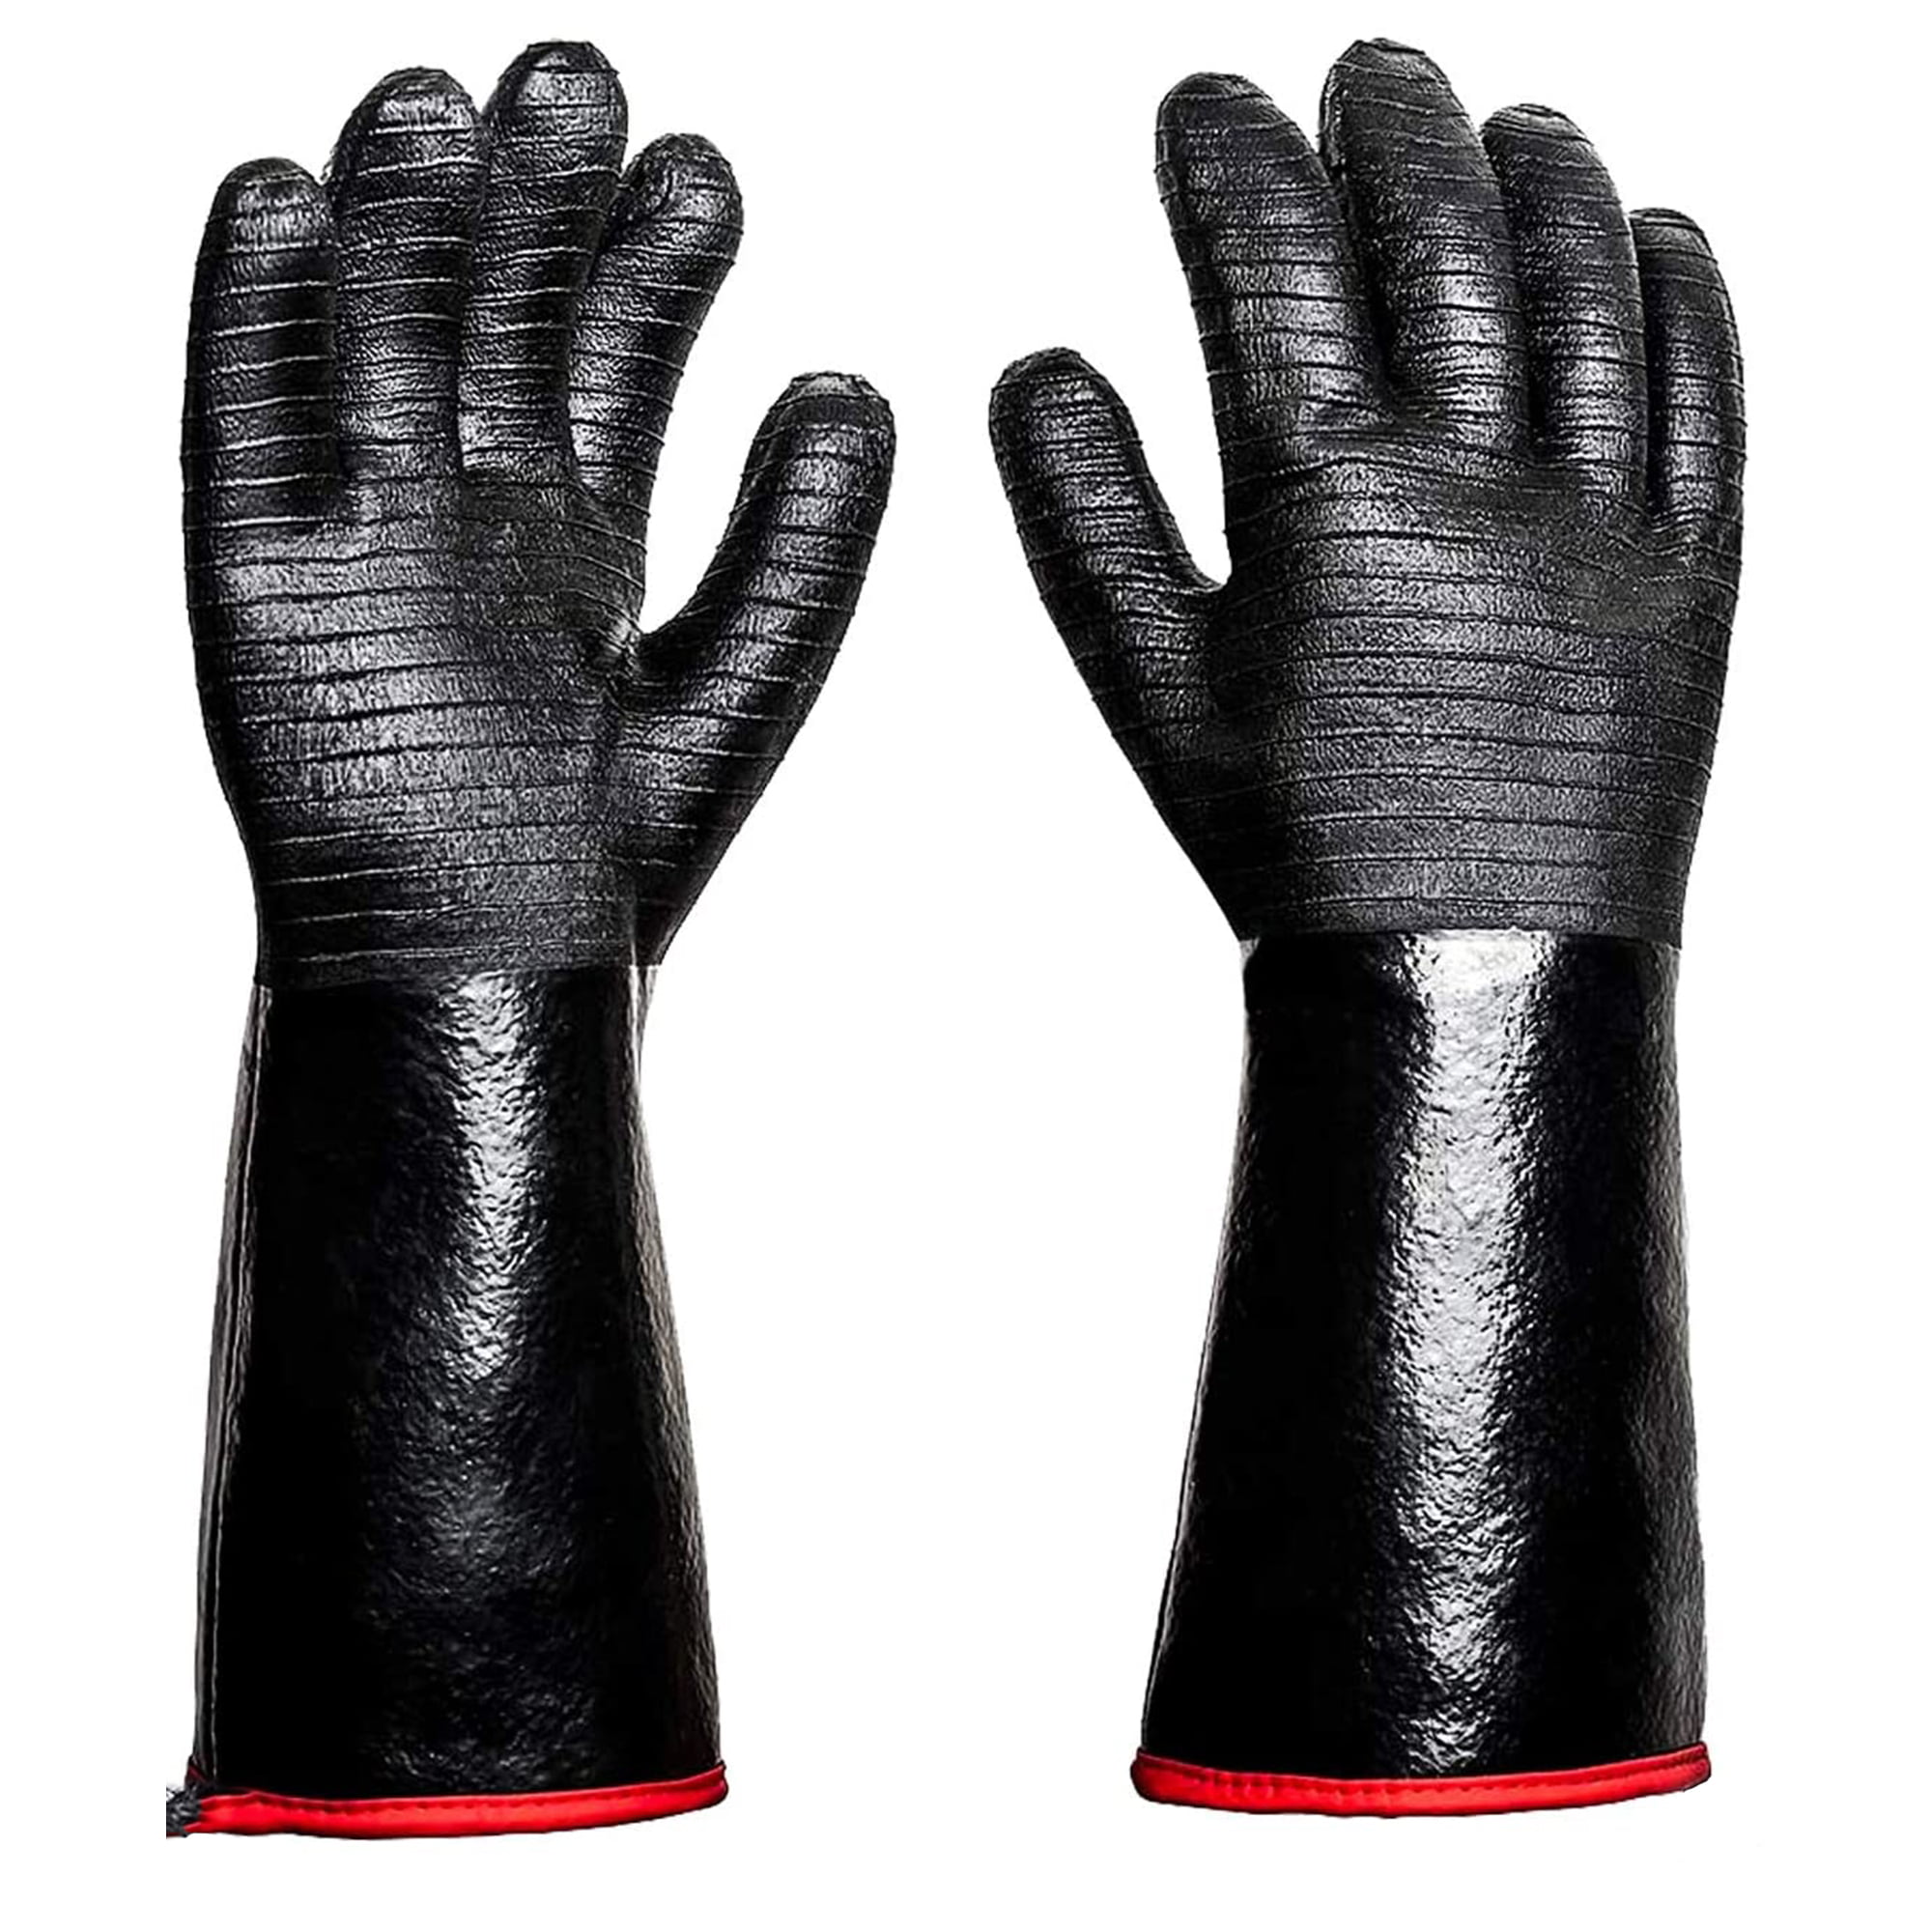 G & F 8115 Heat Resistant Leather Gloves, 15-Inch Extra Long Cuff, Premium  Cowhide Grain Leather, Barbecue, Fireplace, Grill and BBQ Gloves,.., By G F  Products - Walmart.com